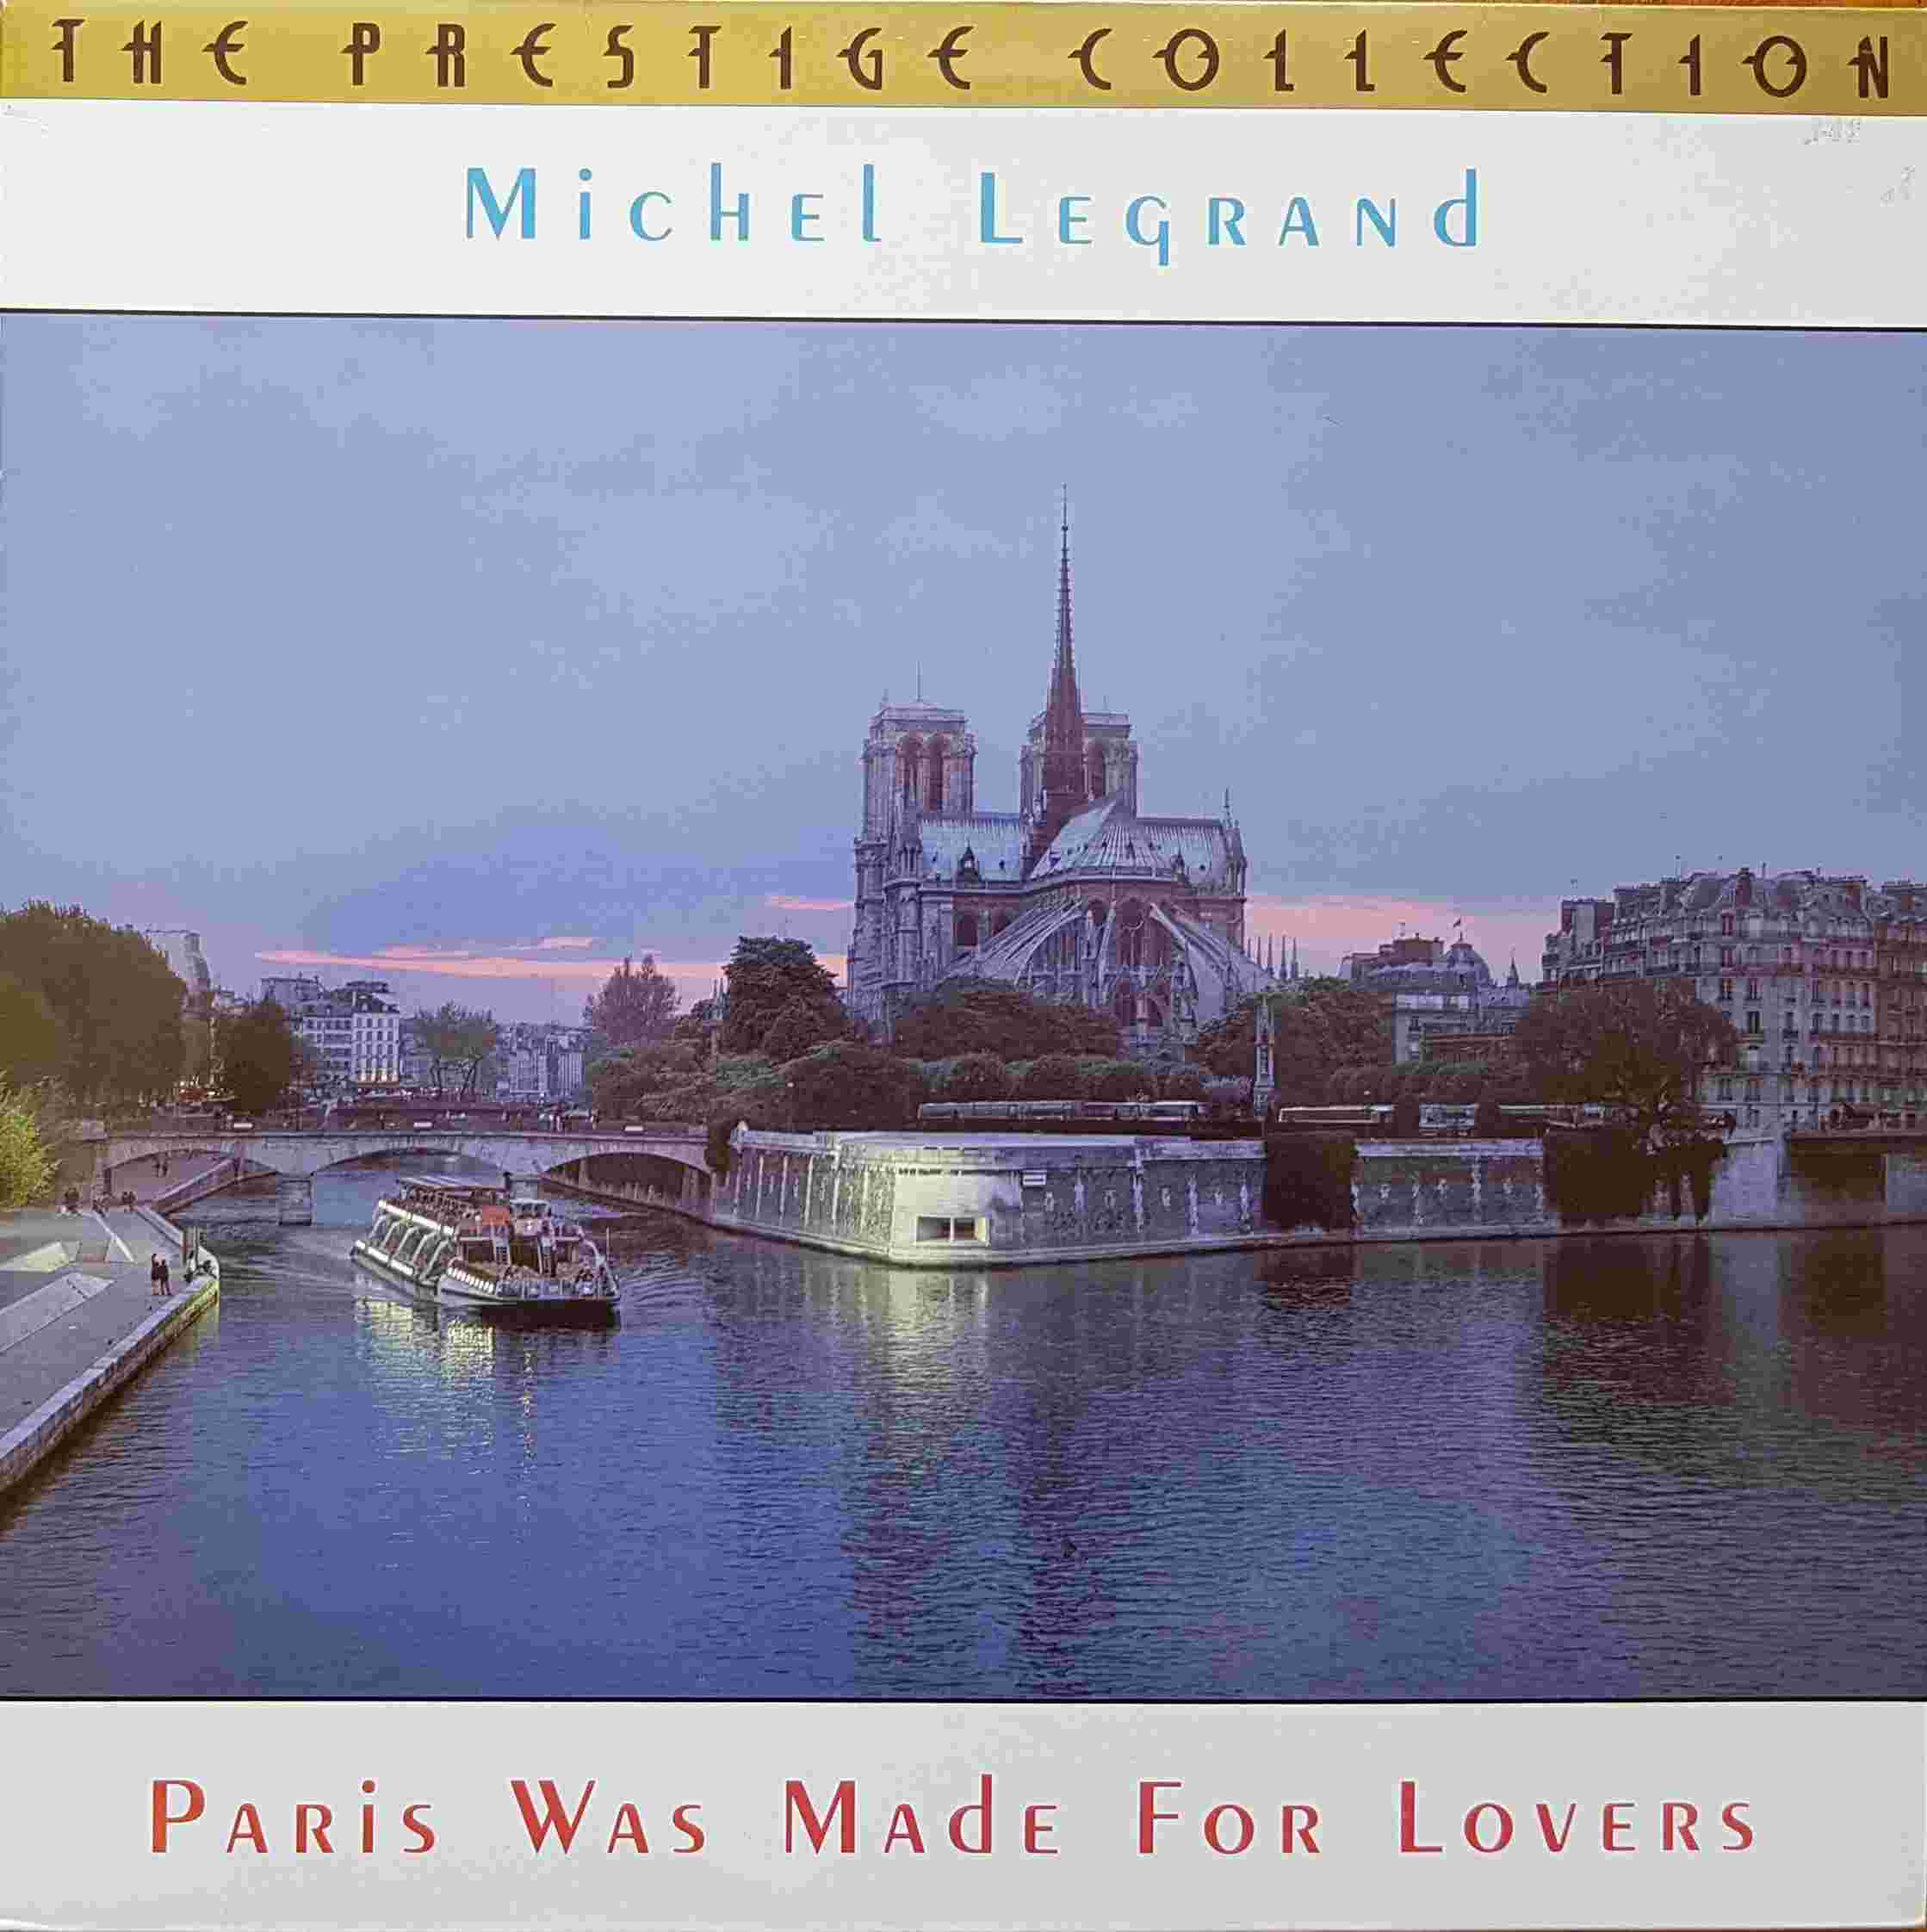 Picture of Paris was made for lovers by artist Michael Legrand from the BBC albums - Records and Tapes library